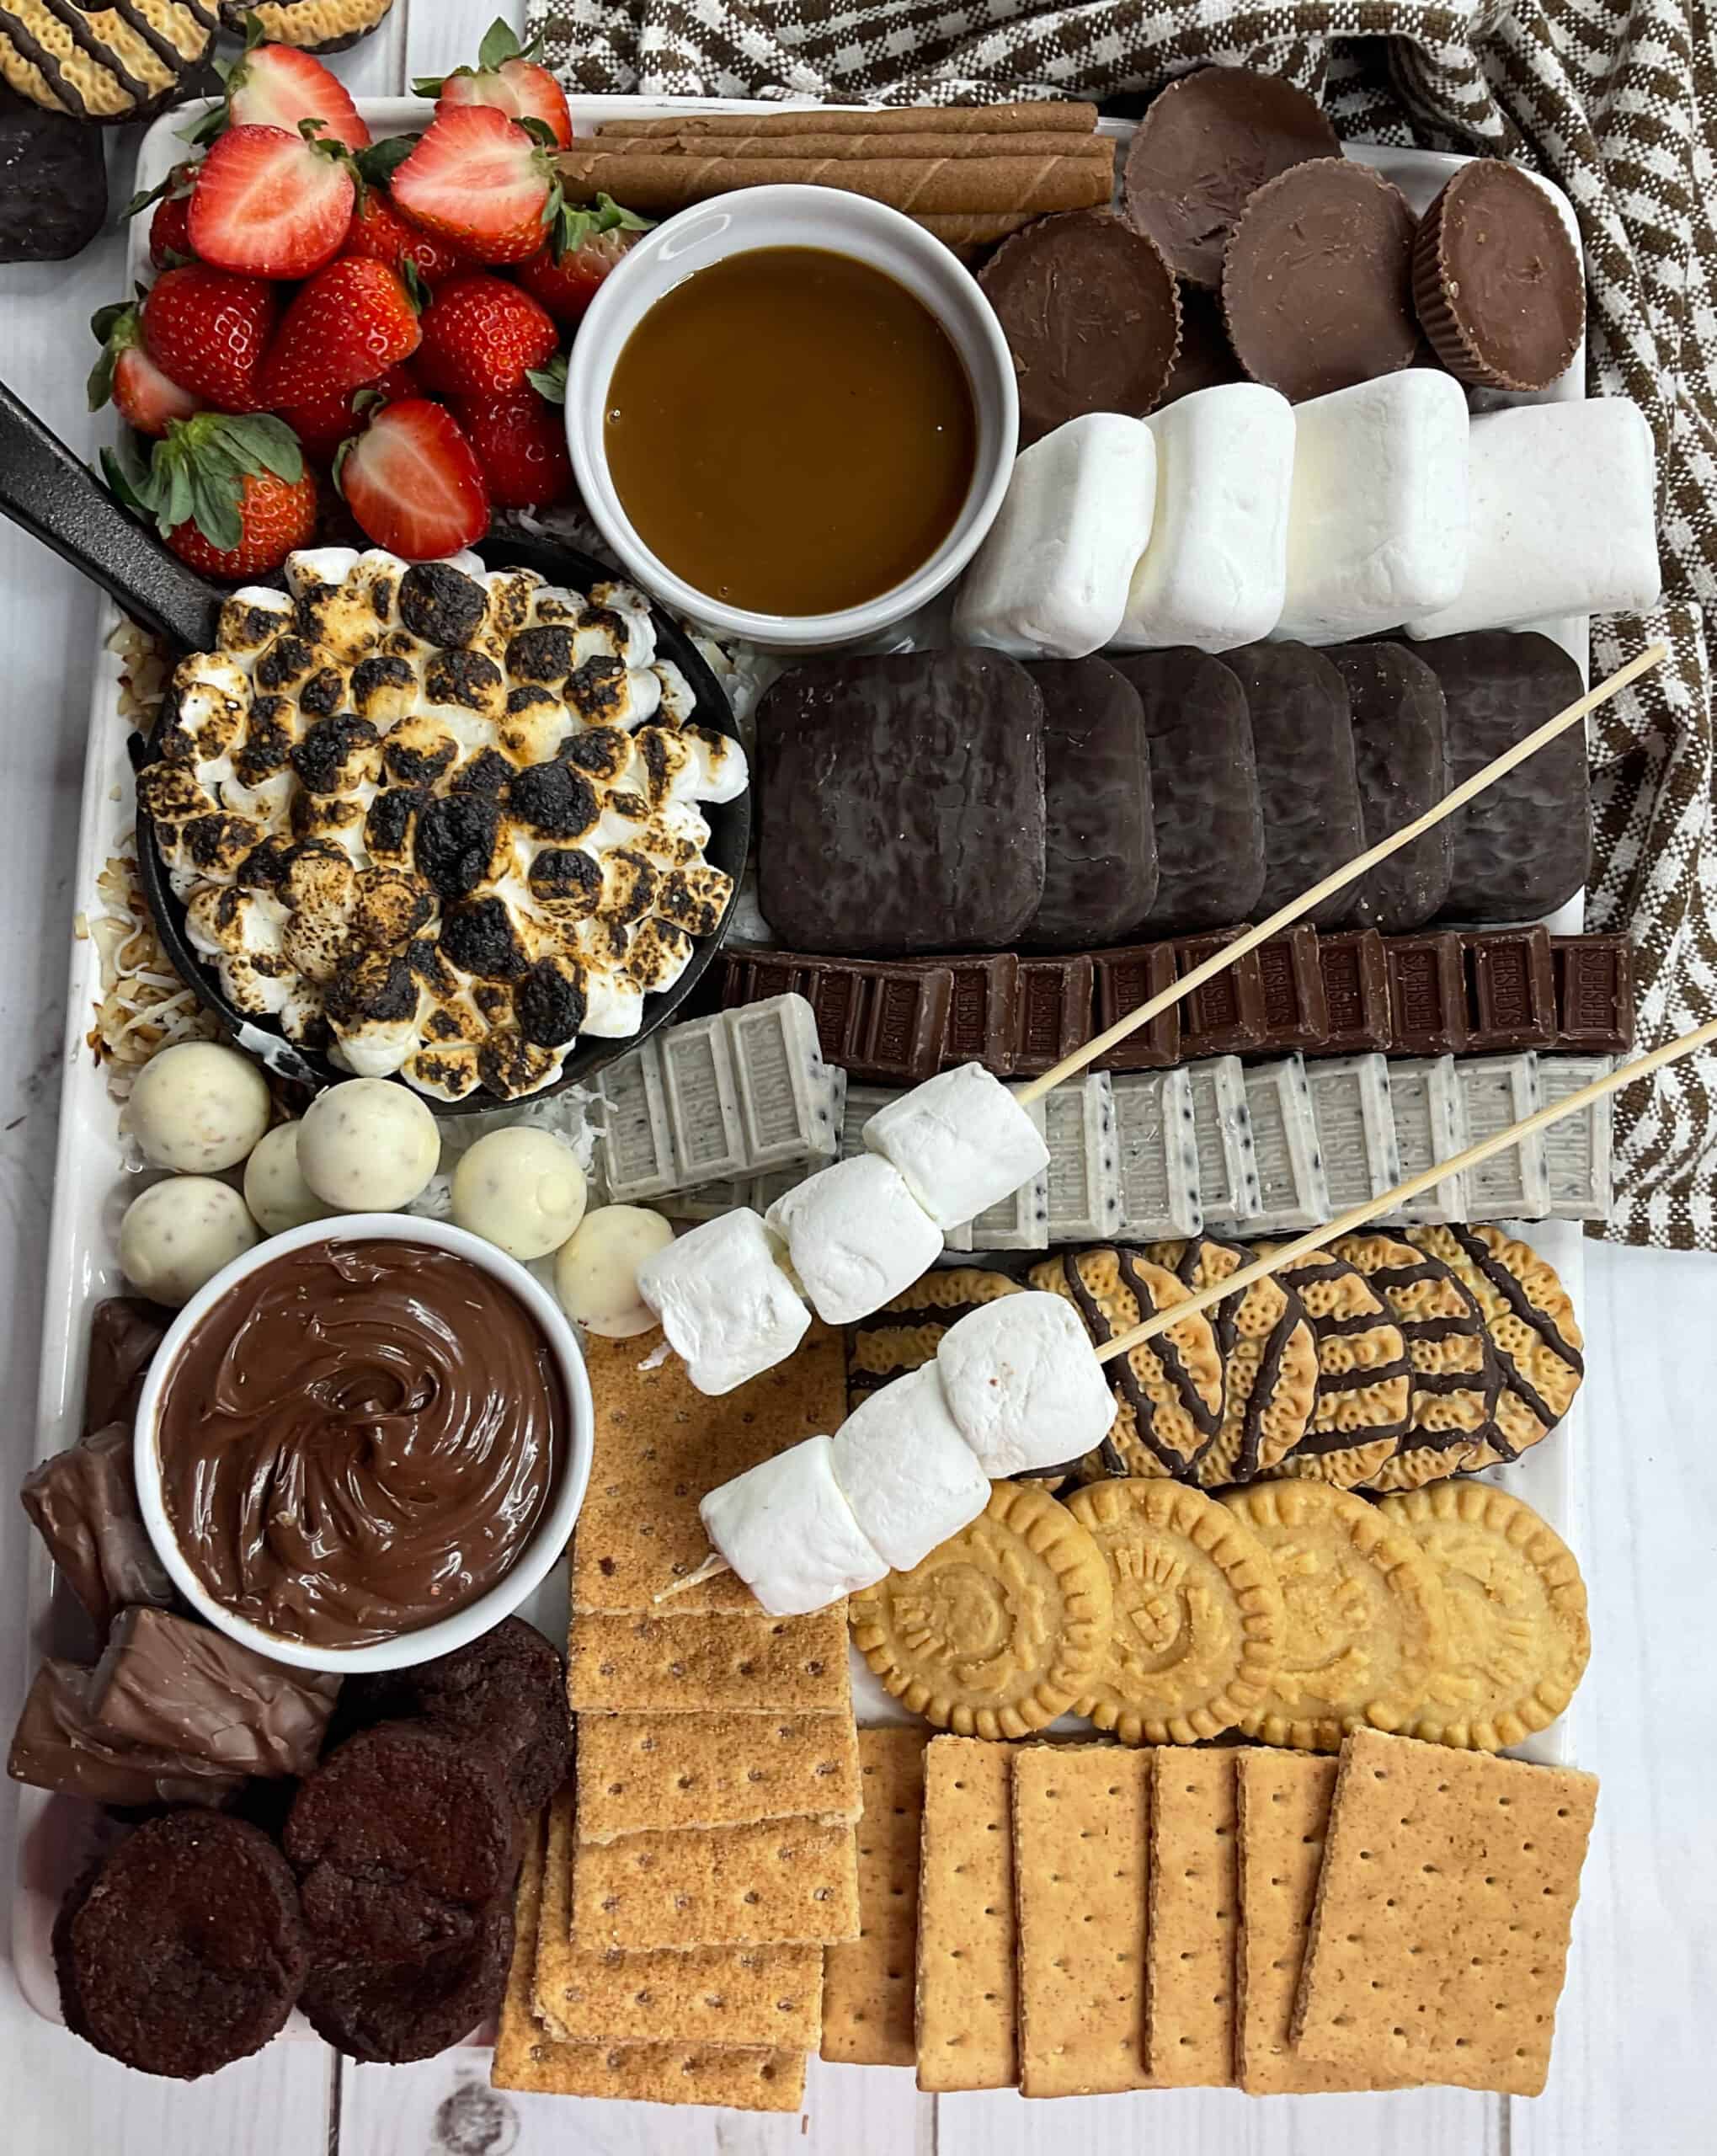 How To Make a S’mores Charcuterie Board